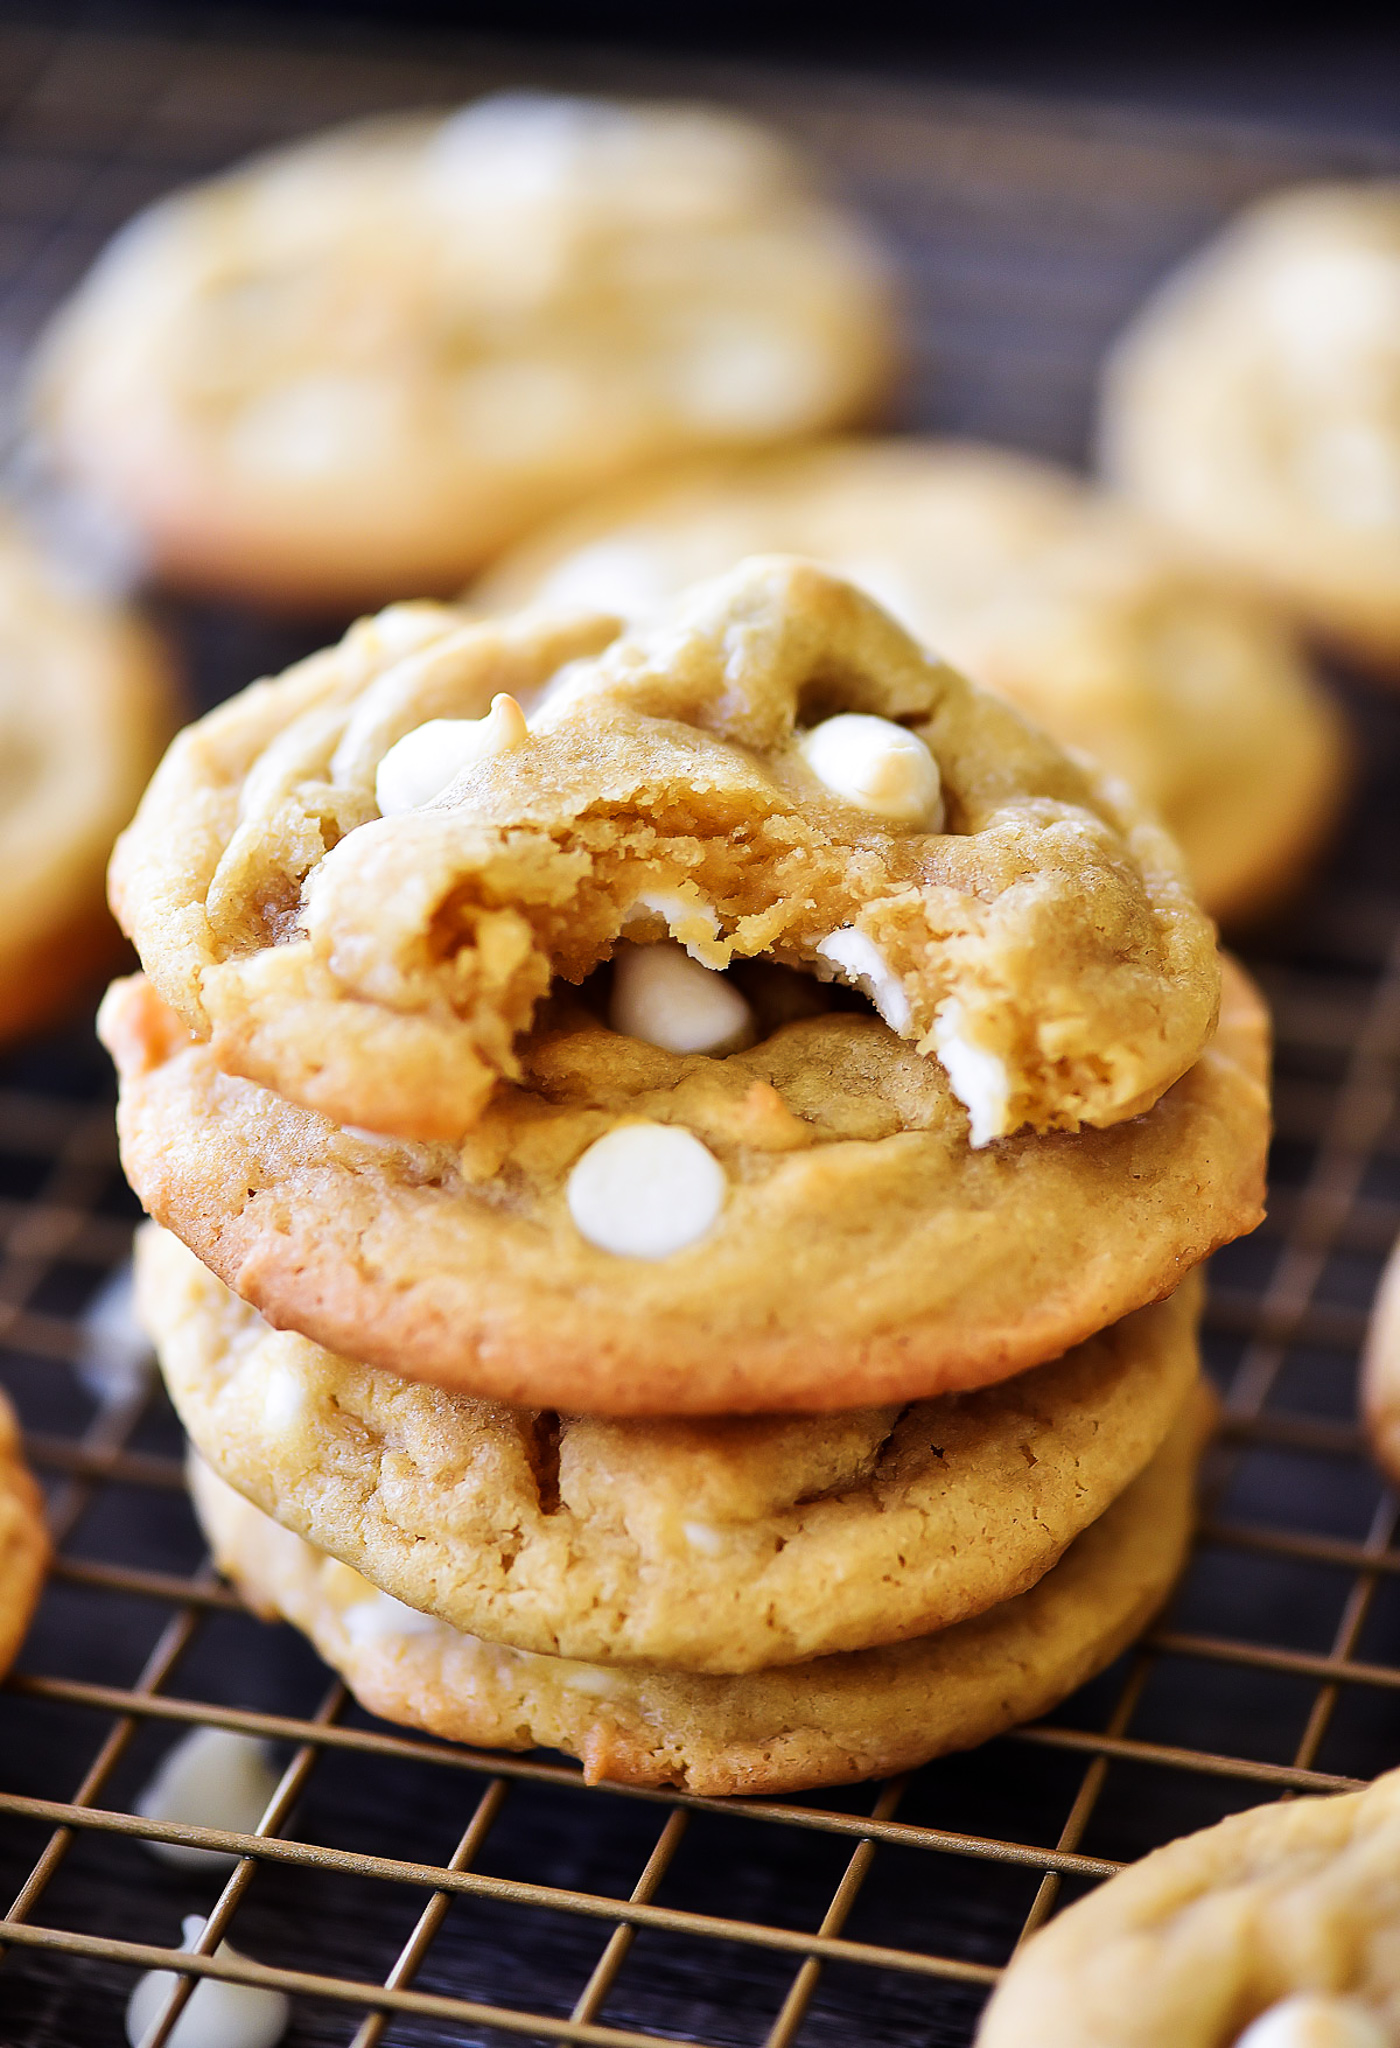 White Chocolate Chip Pudding Cookies are award-winning cookies. They are loaded with white chocolate flavor and are soft, chewy and absolutely amazing!